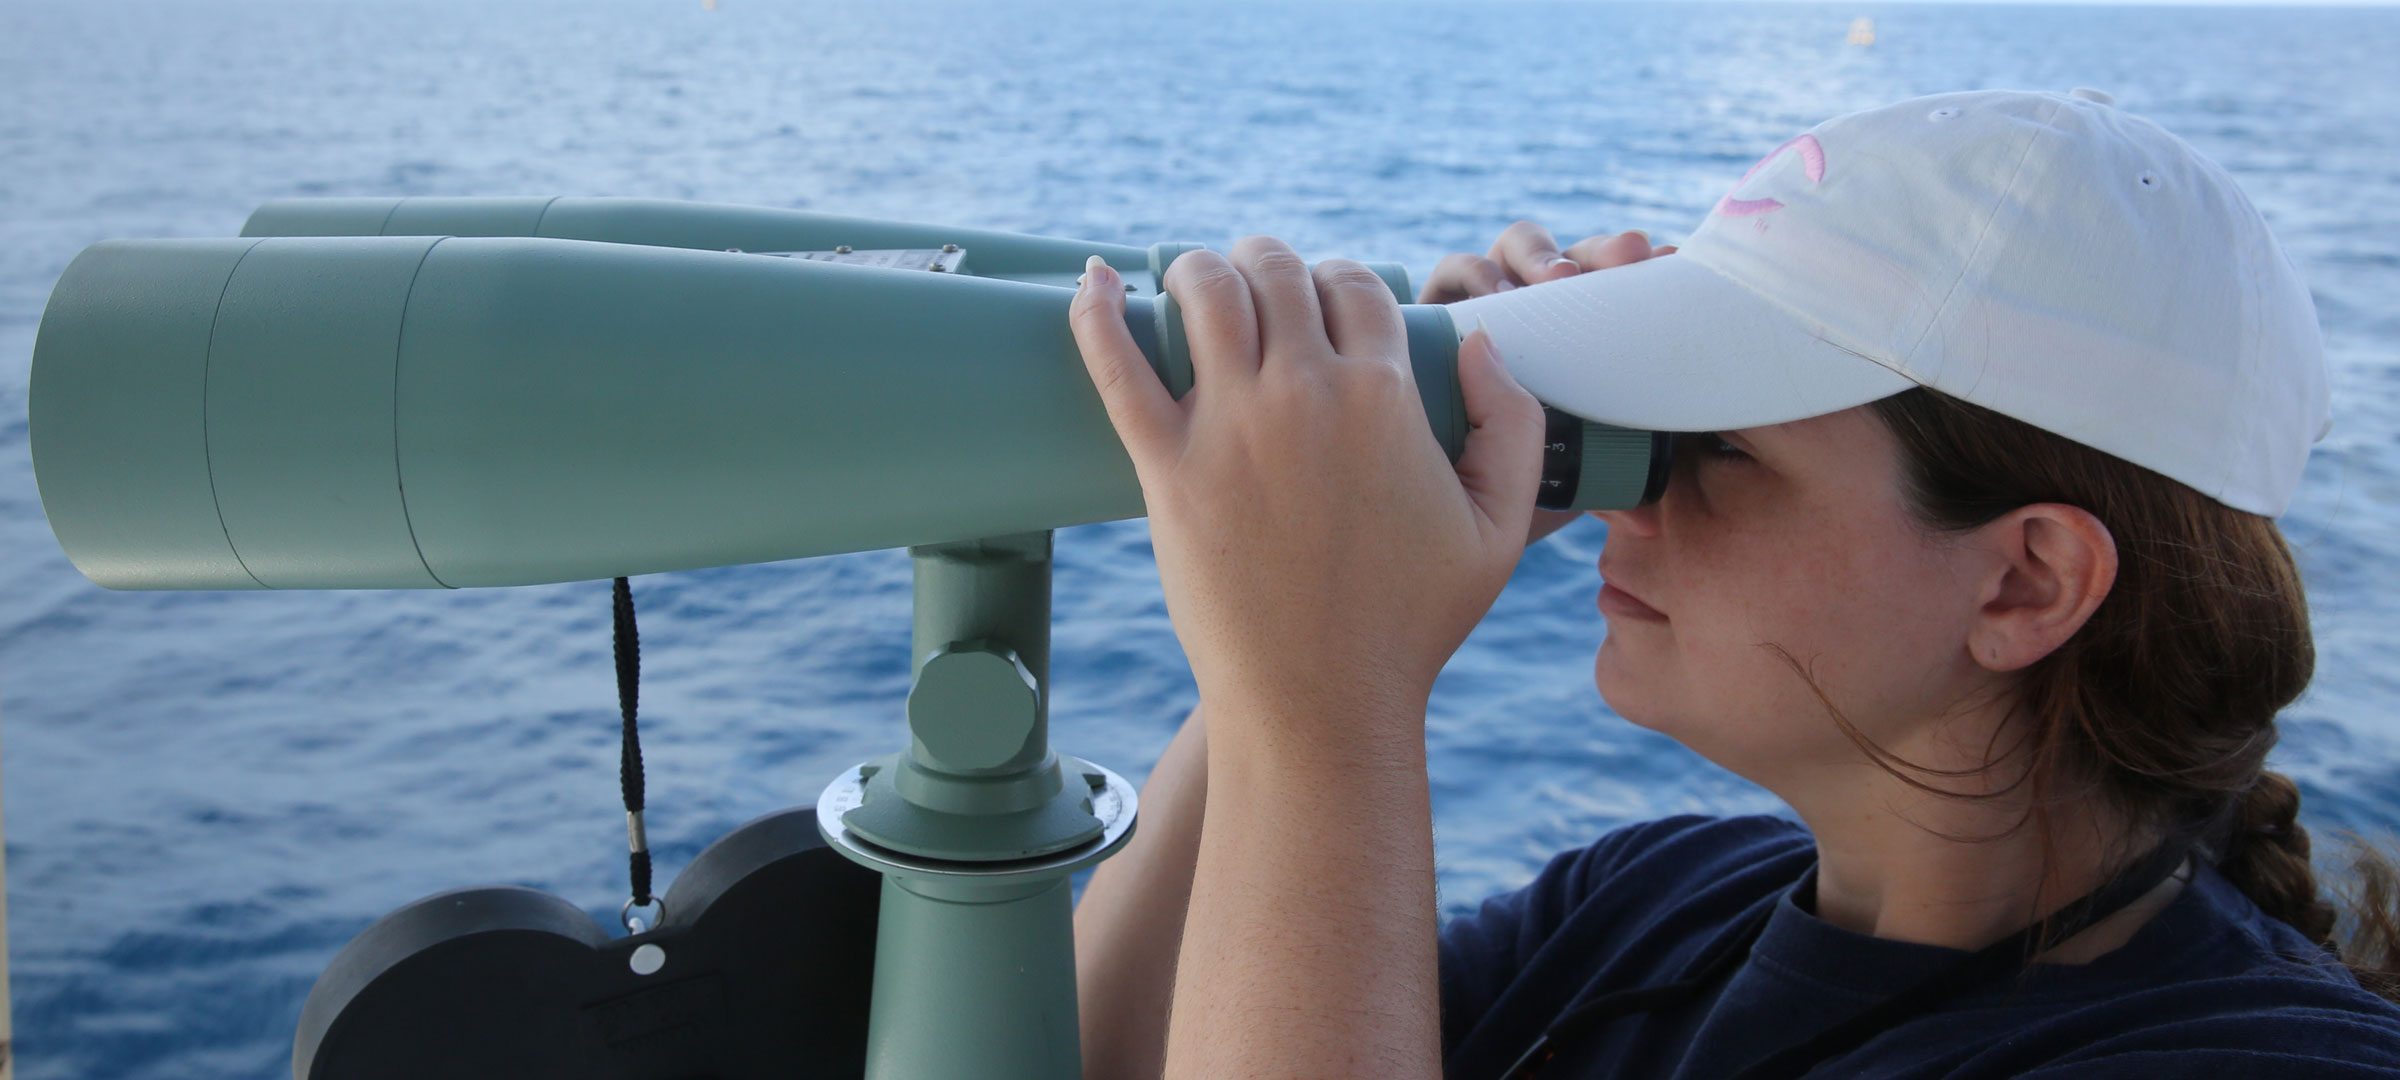 A University of Louisiana at 69ý research faculty member looks through binoculars over water during a research trip into the Gulf of Mexico